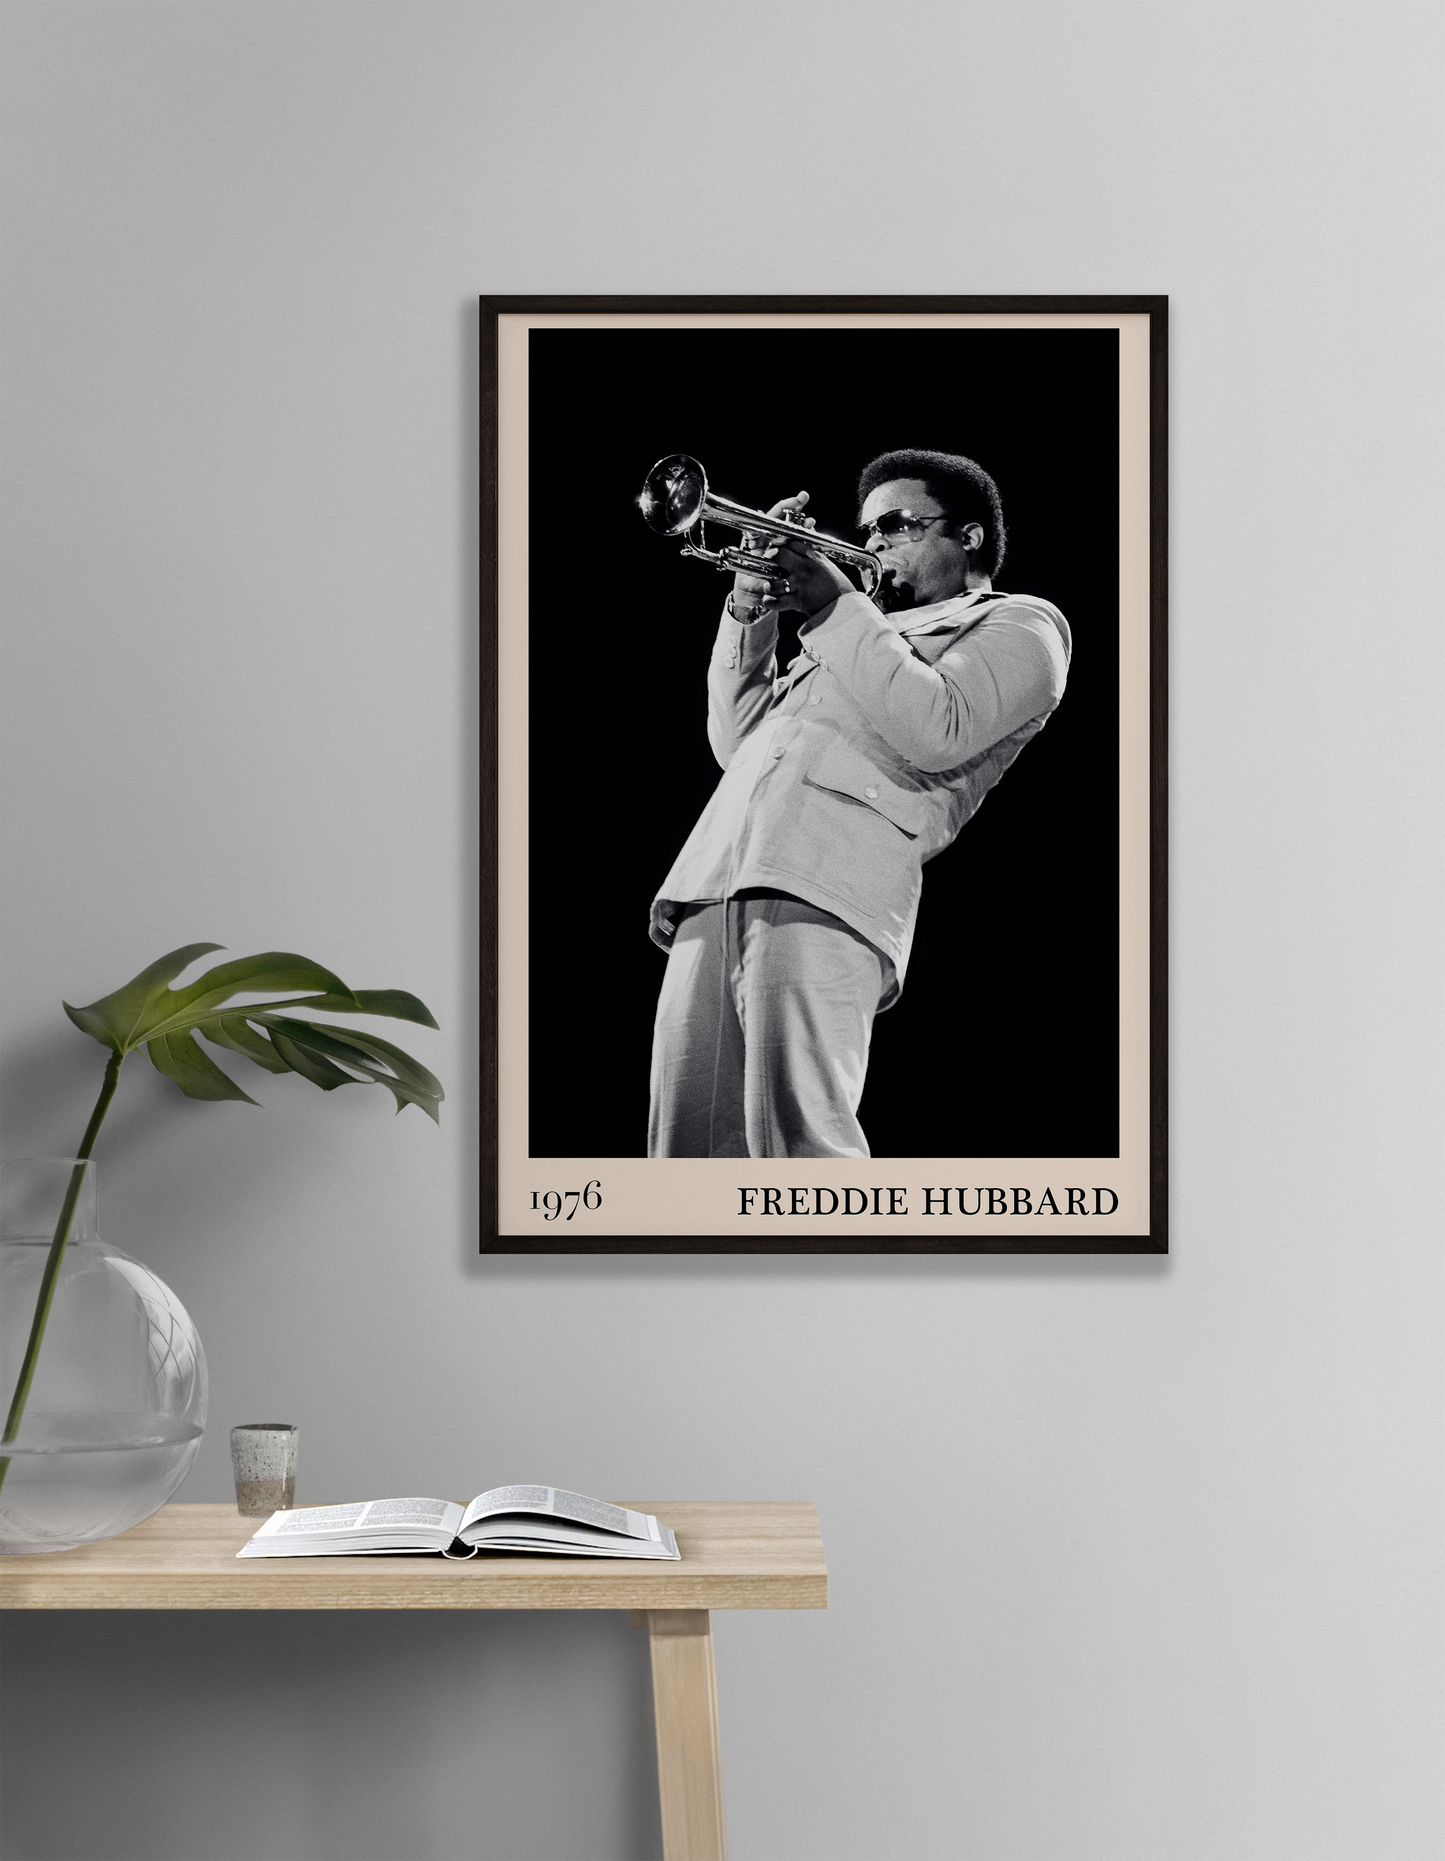 1976 photograph of Freddie Hubbard taken by Thomas Marcello. Picture crafted into a cool black framed jazz print, with an off-white border. Poster is hanging on a off-white living room wall.